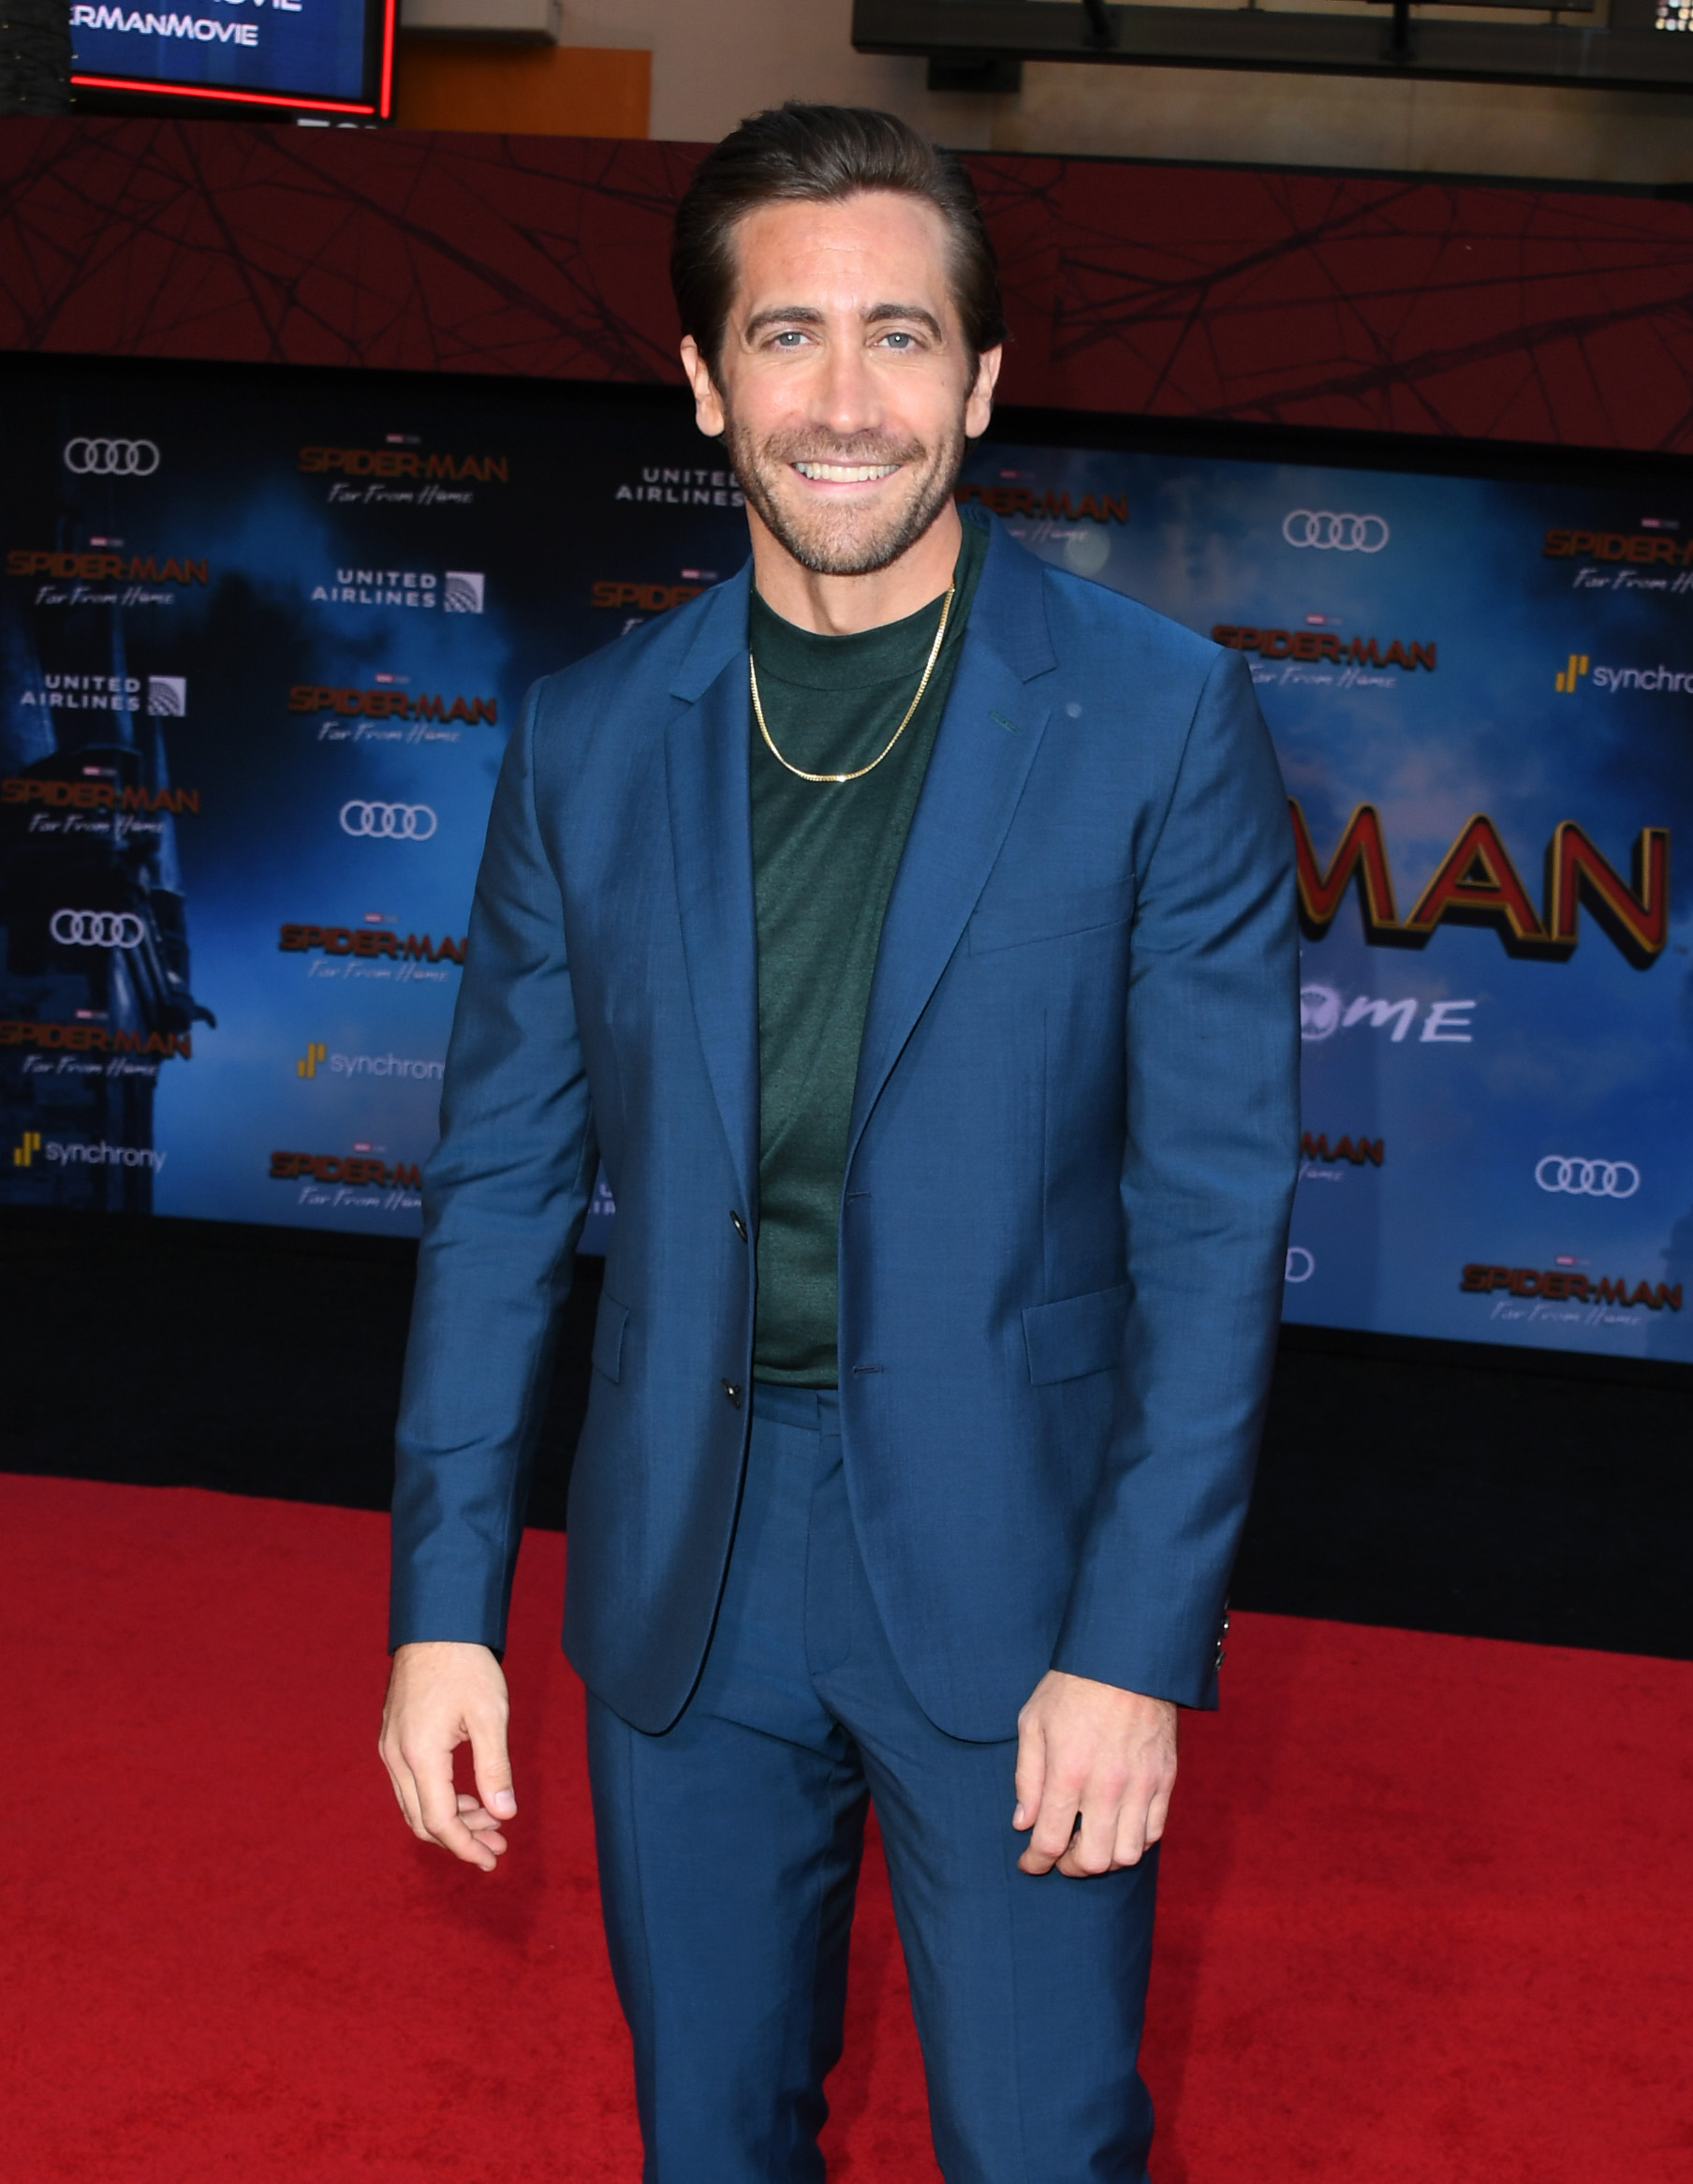 Jake Gyllenhaal attends the Premiere Of Sony Pictures' "Spider-Man Far From Home" at TCL Chinese Theatre on June 26, 2019 in Hollywood, California. 